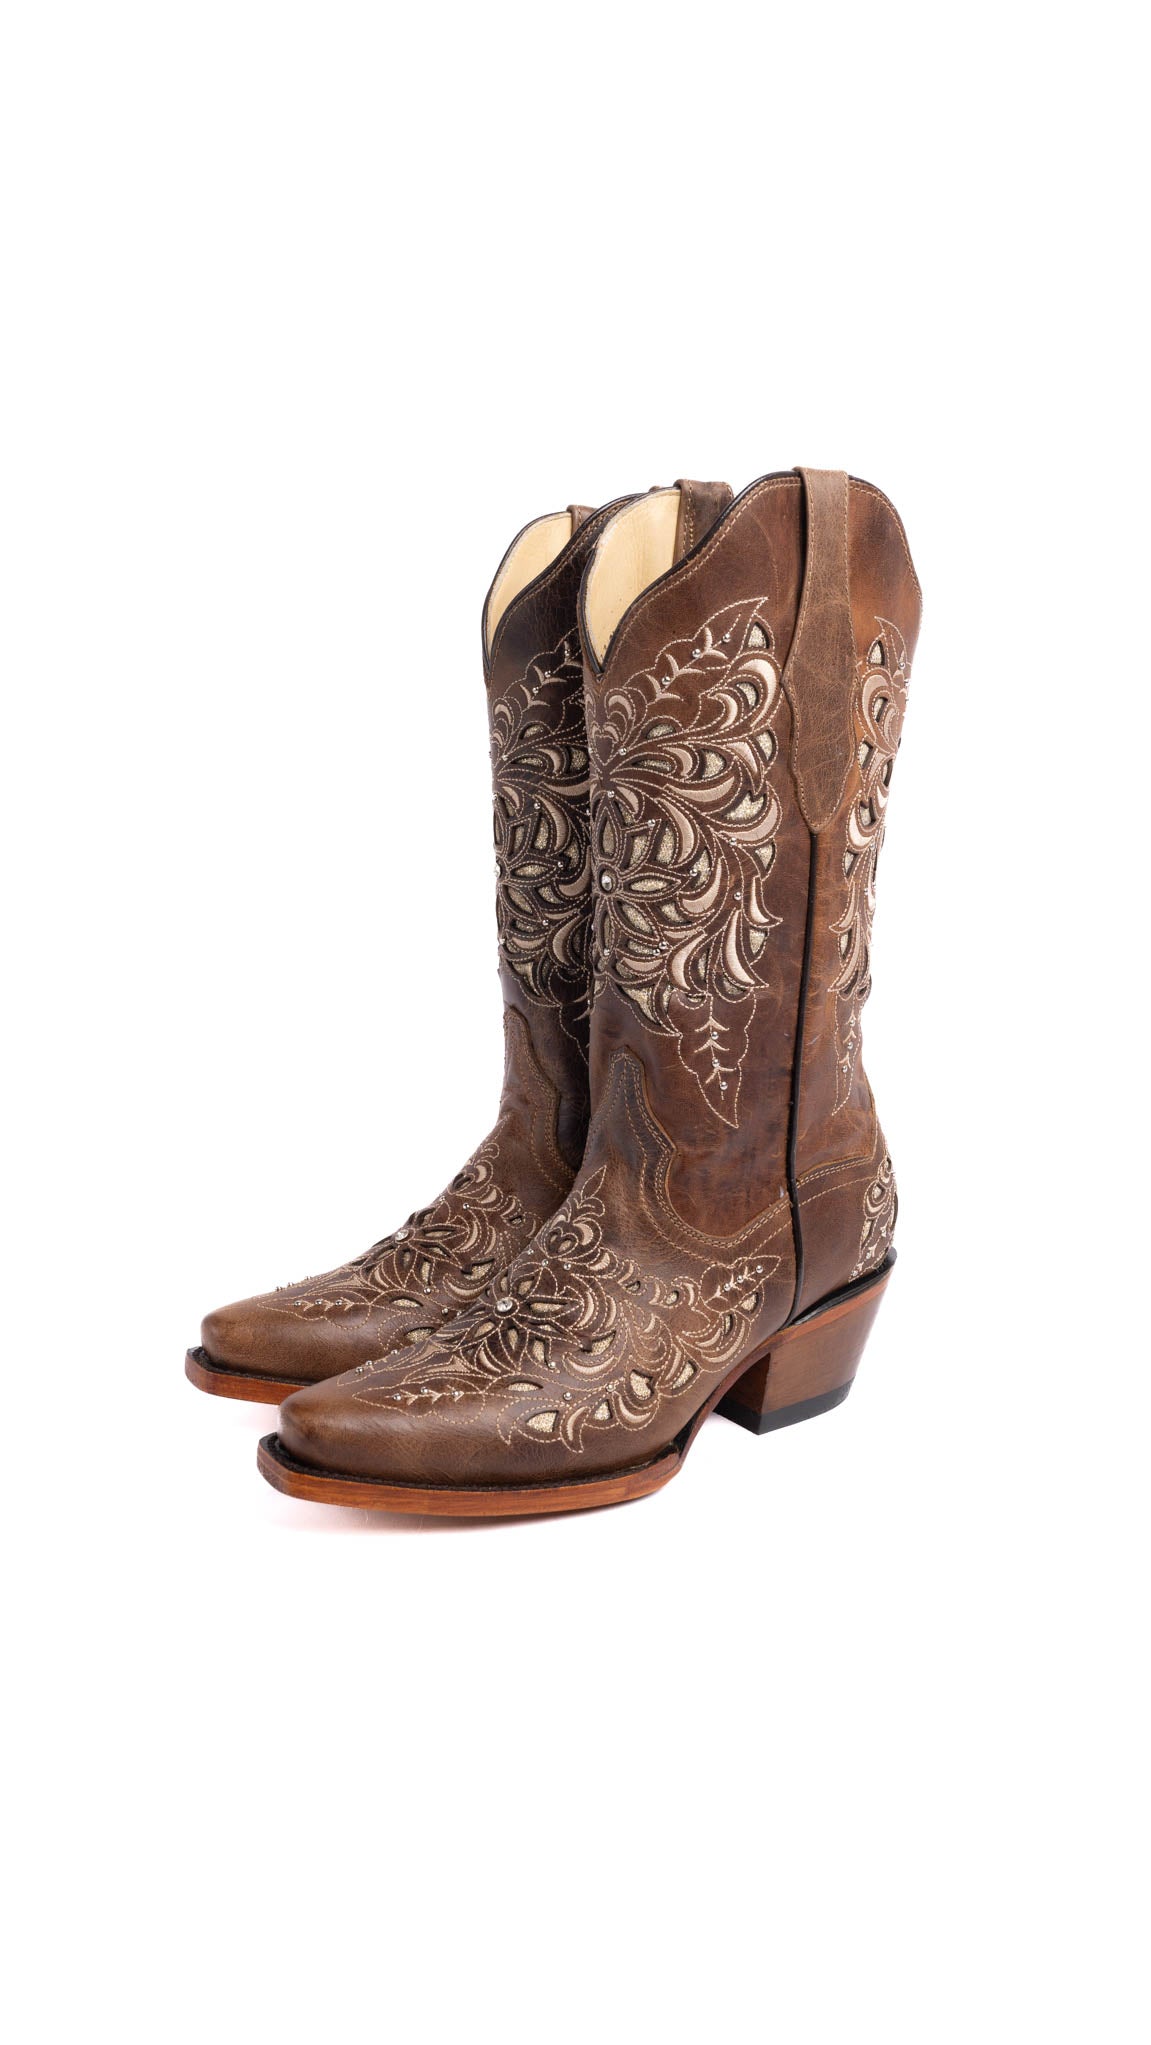 Country Pull Up Cuero Retro Cowgirl Boots